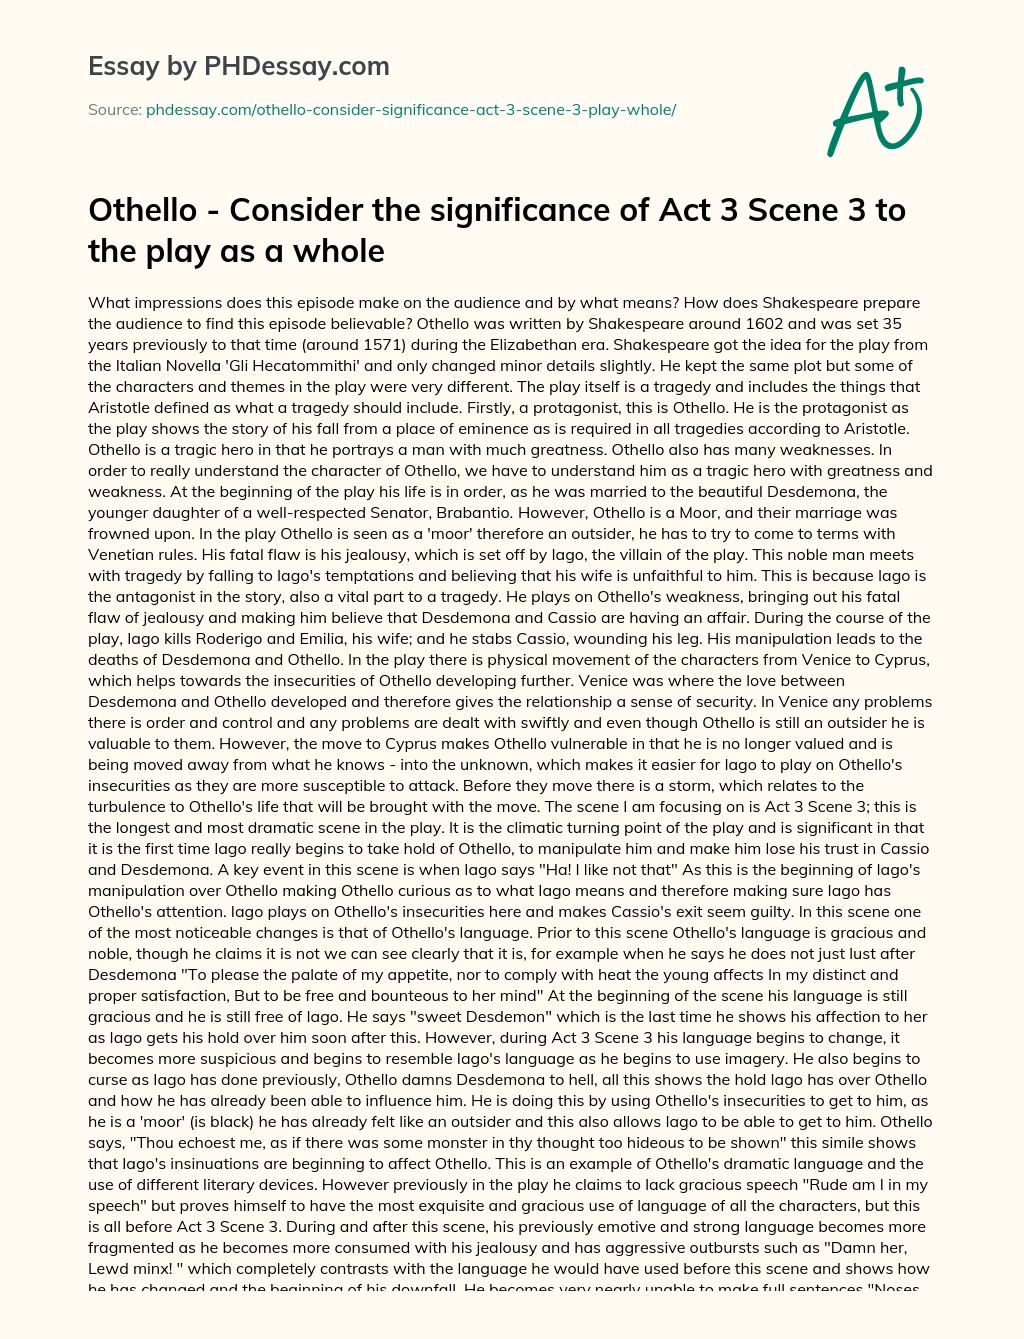 Othello – Consider the significance of Act 3 Scene 3 to the play as a whole essay